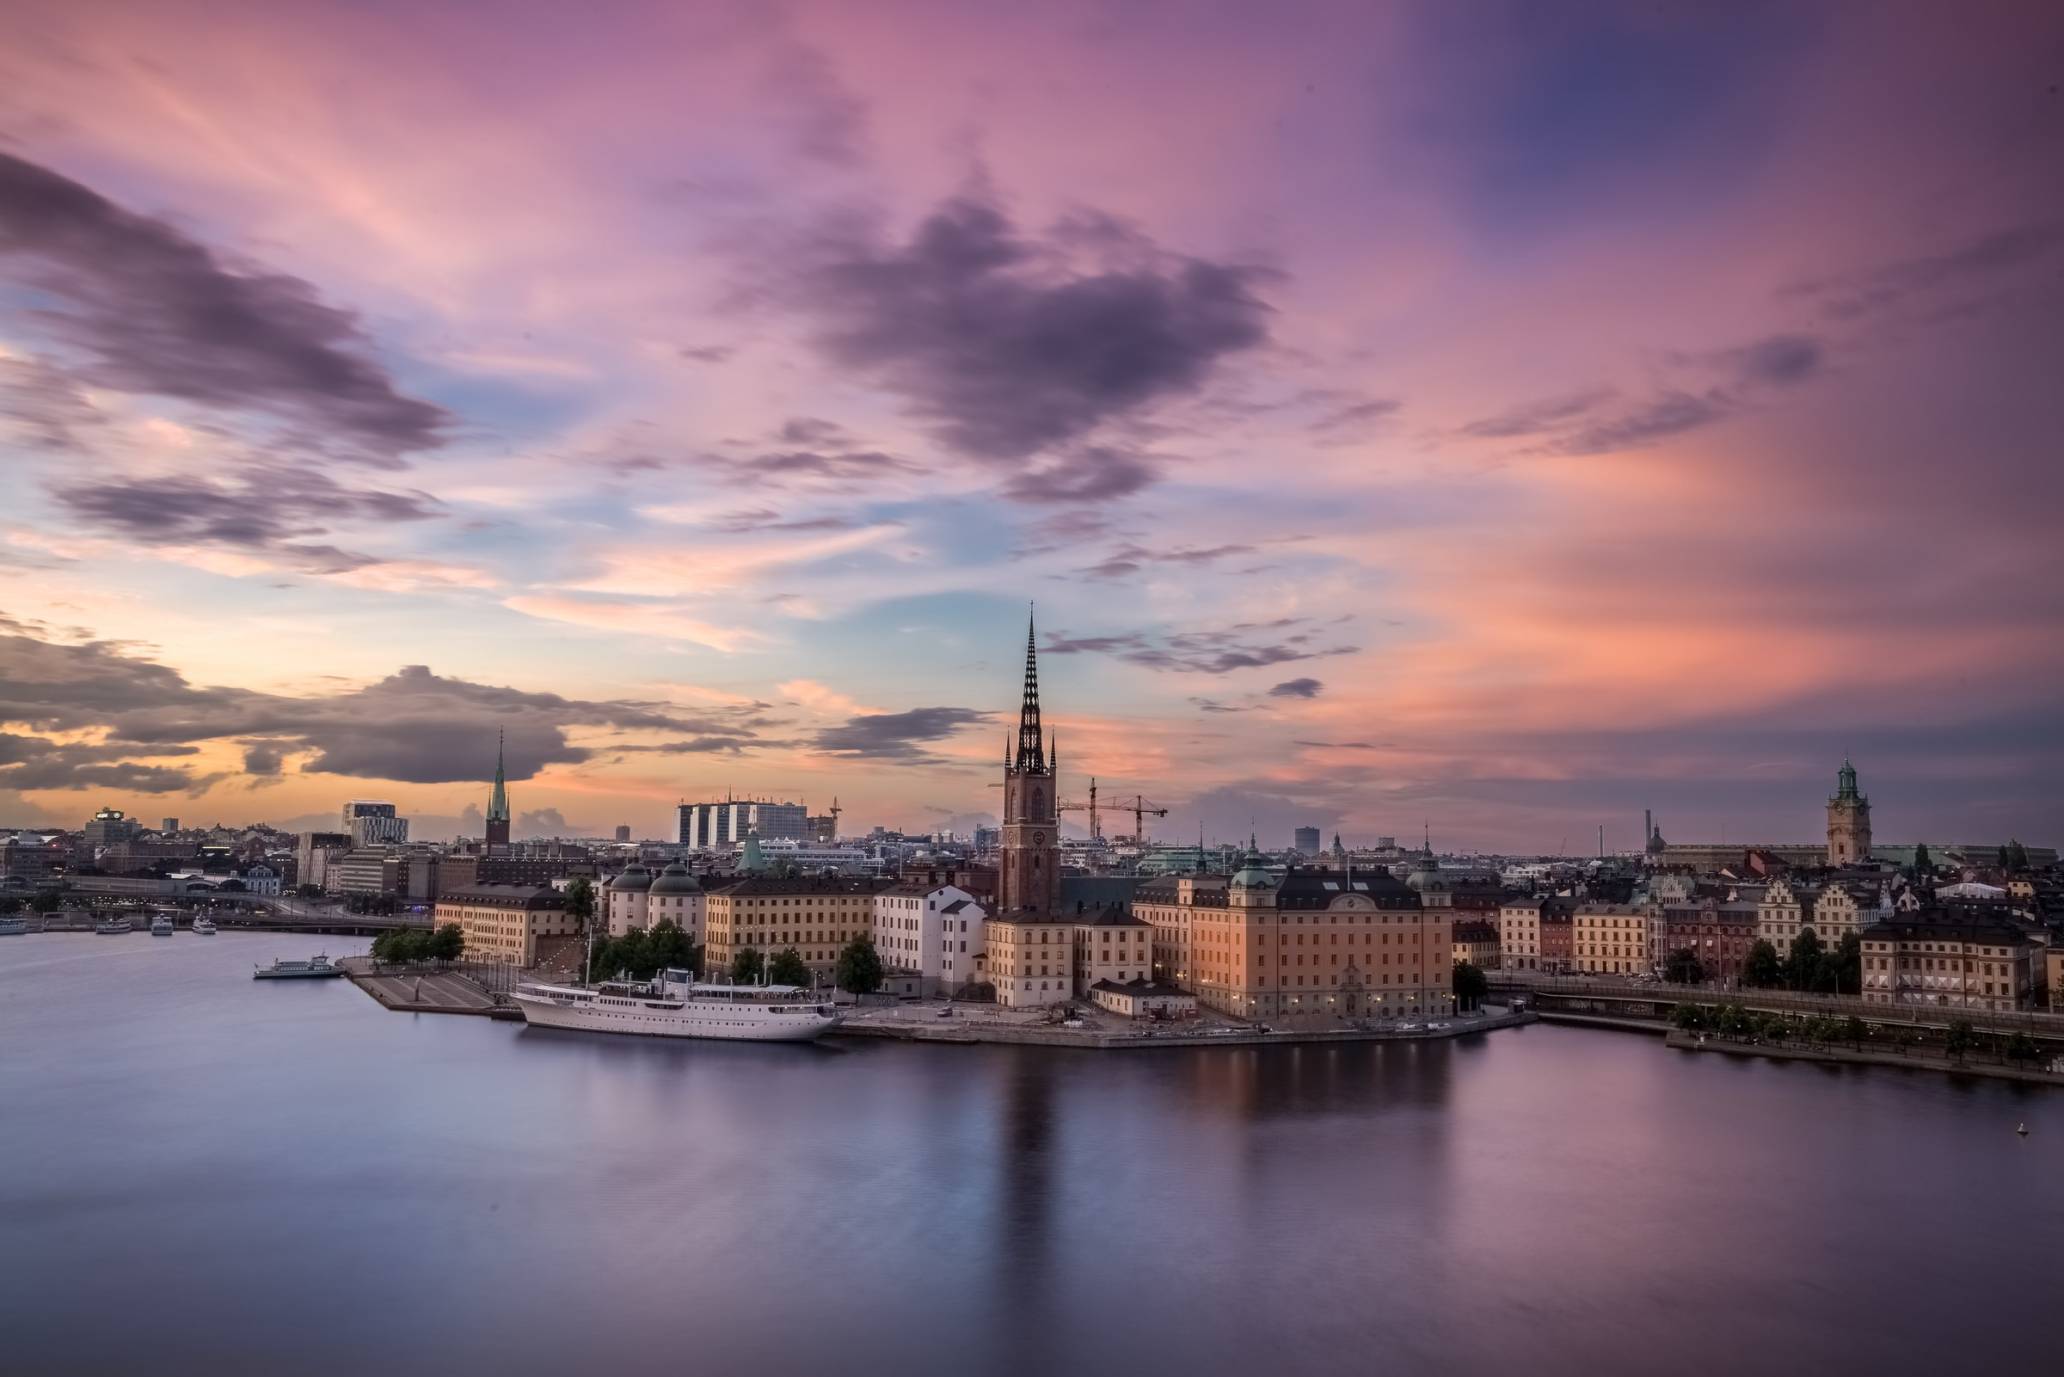 view over the city and water of Stockholm